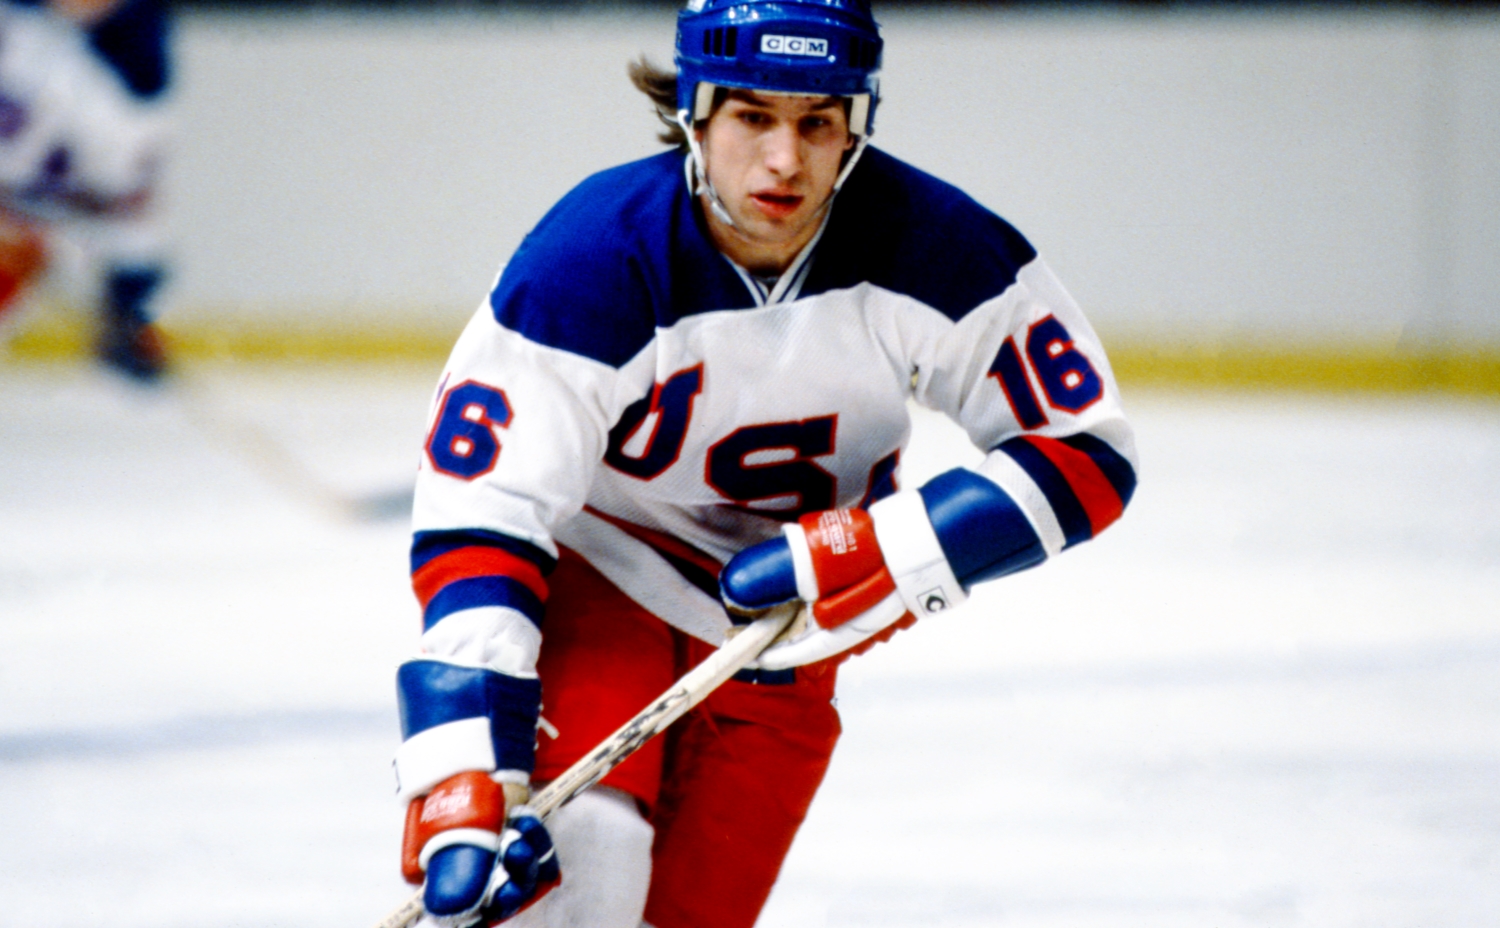 Mark Pavelich skates during an exhibition game against the Soviet Union during his time as a member of the 1980 'Miracle on Ice' Olympic hockey team.